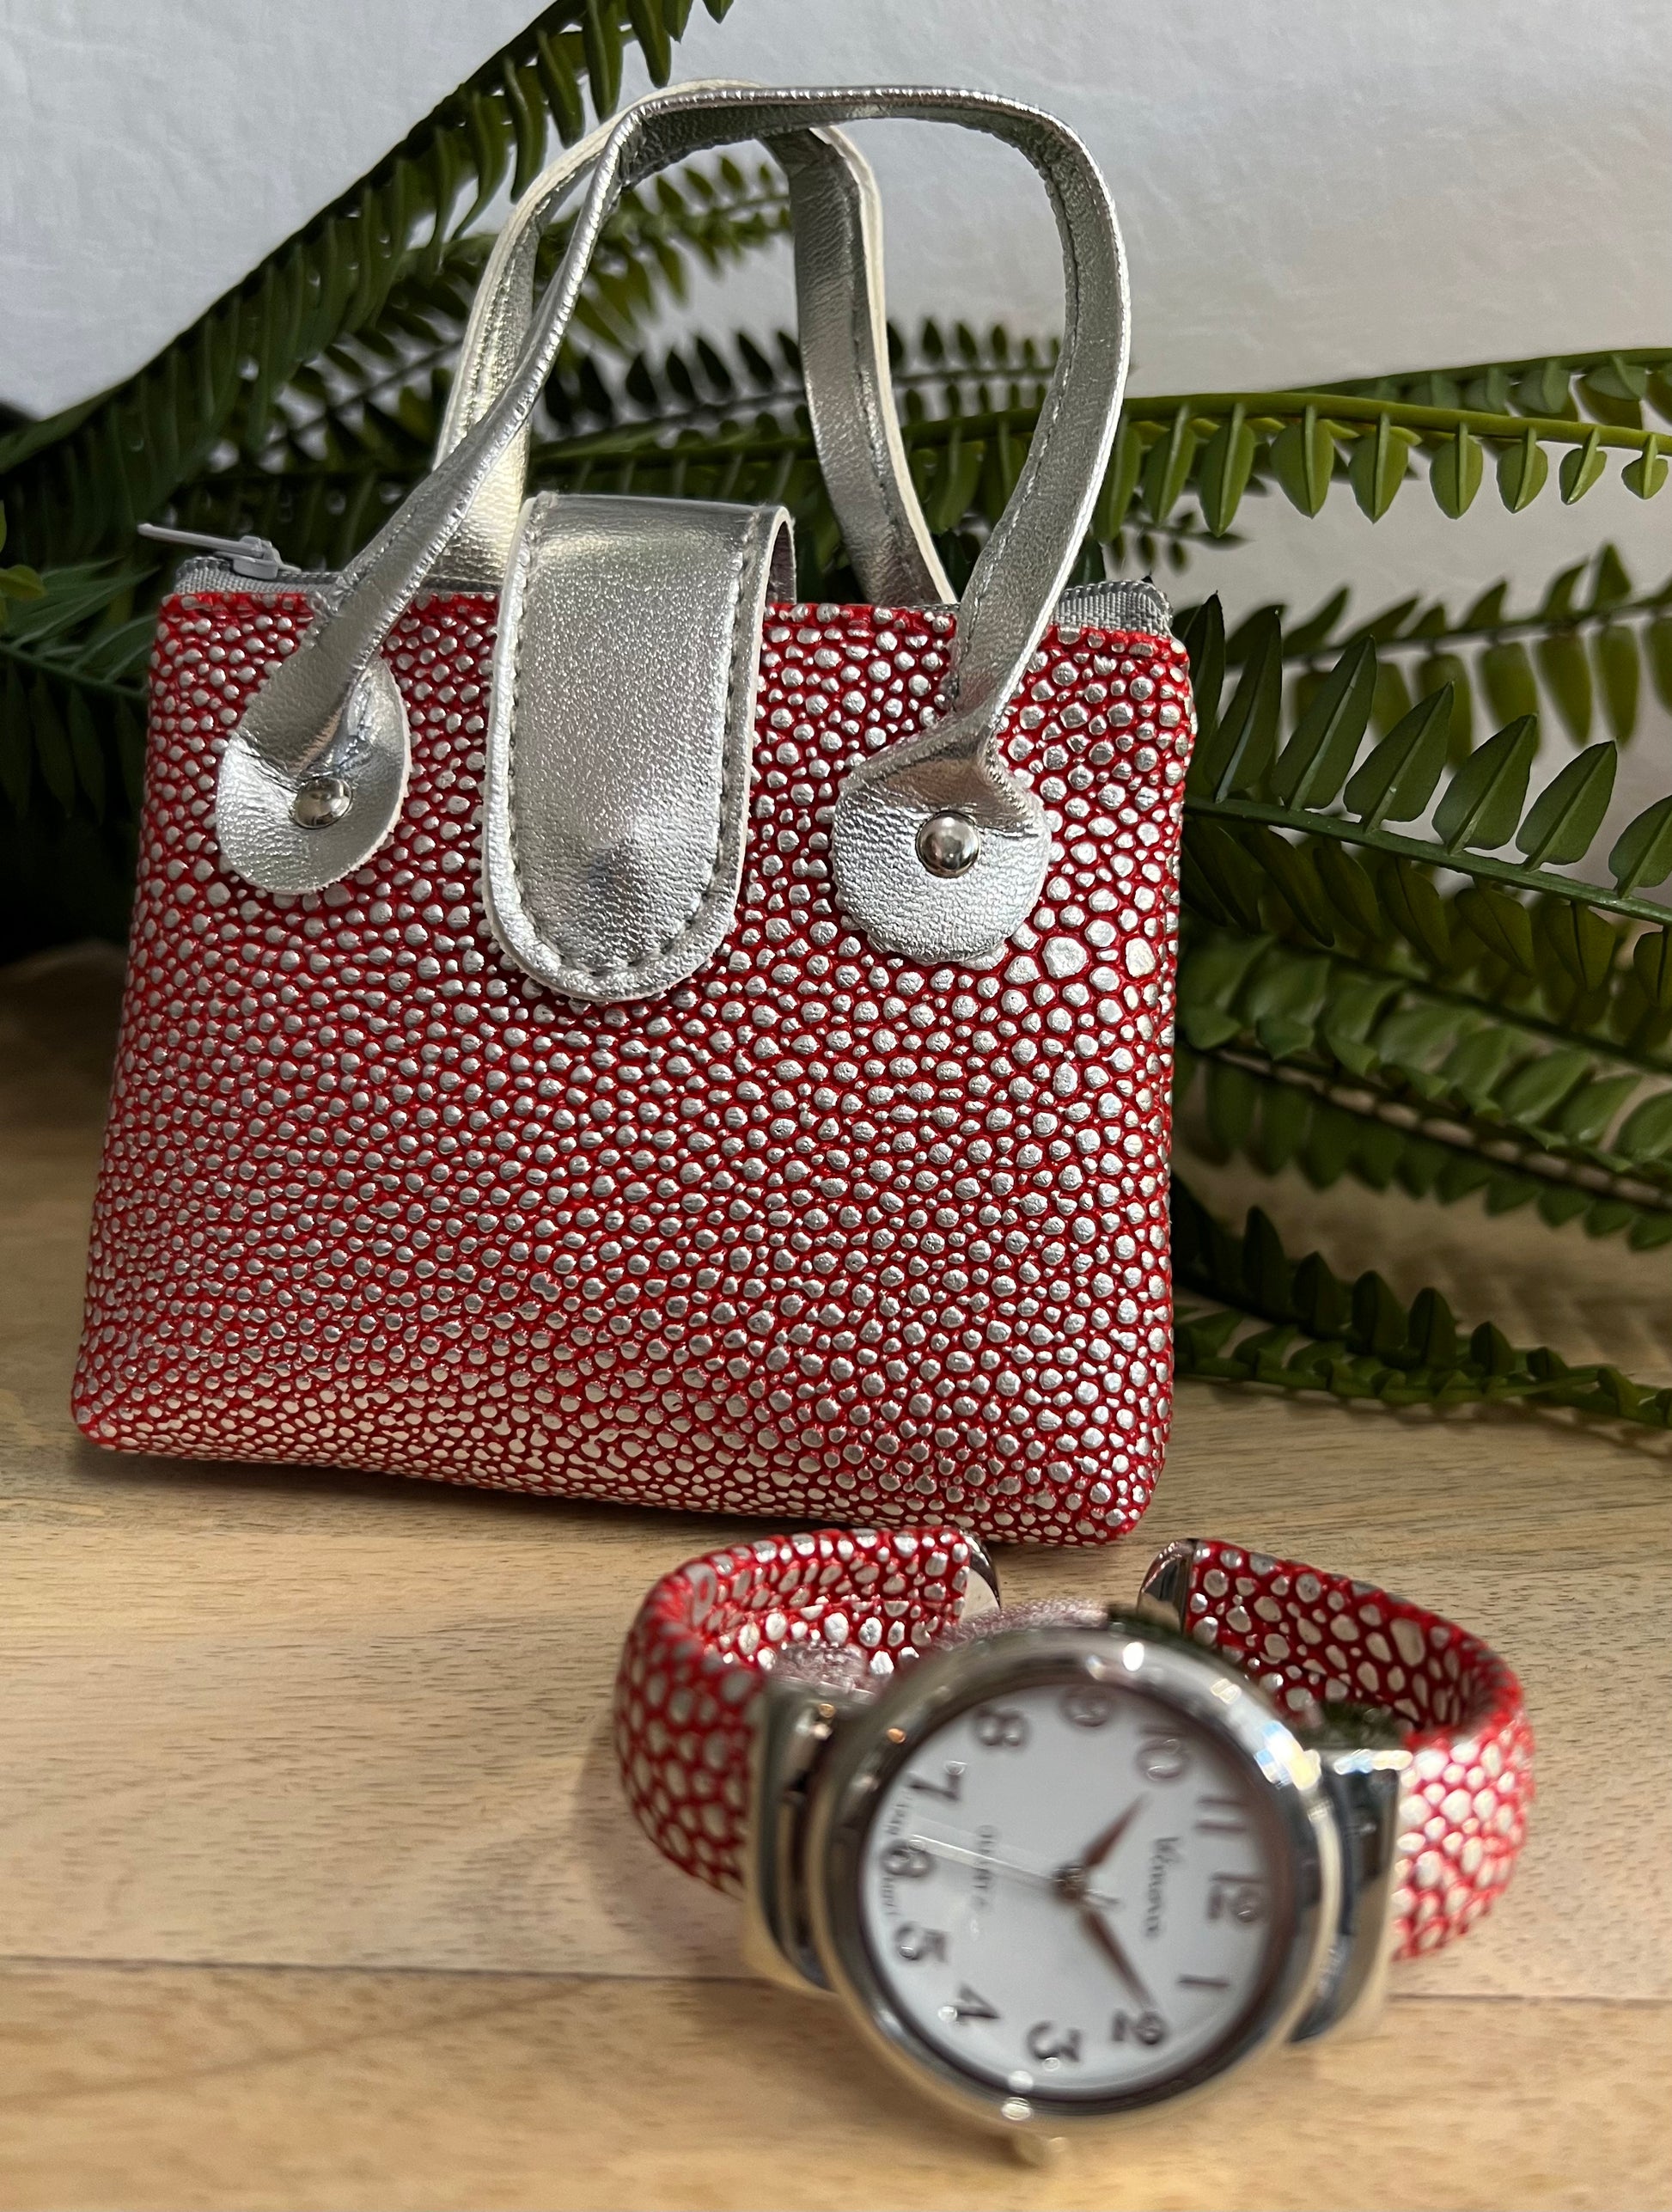 Watch with Carry Bag - Emelda's Shoes